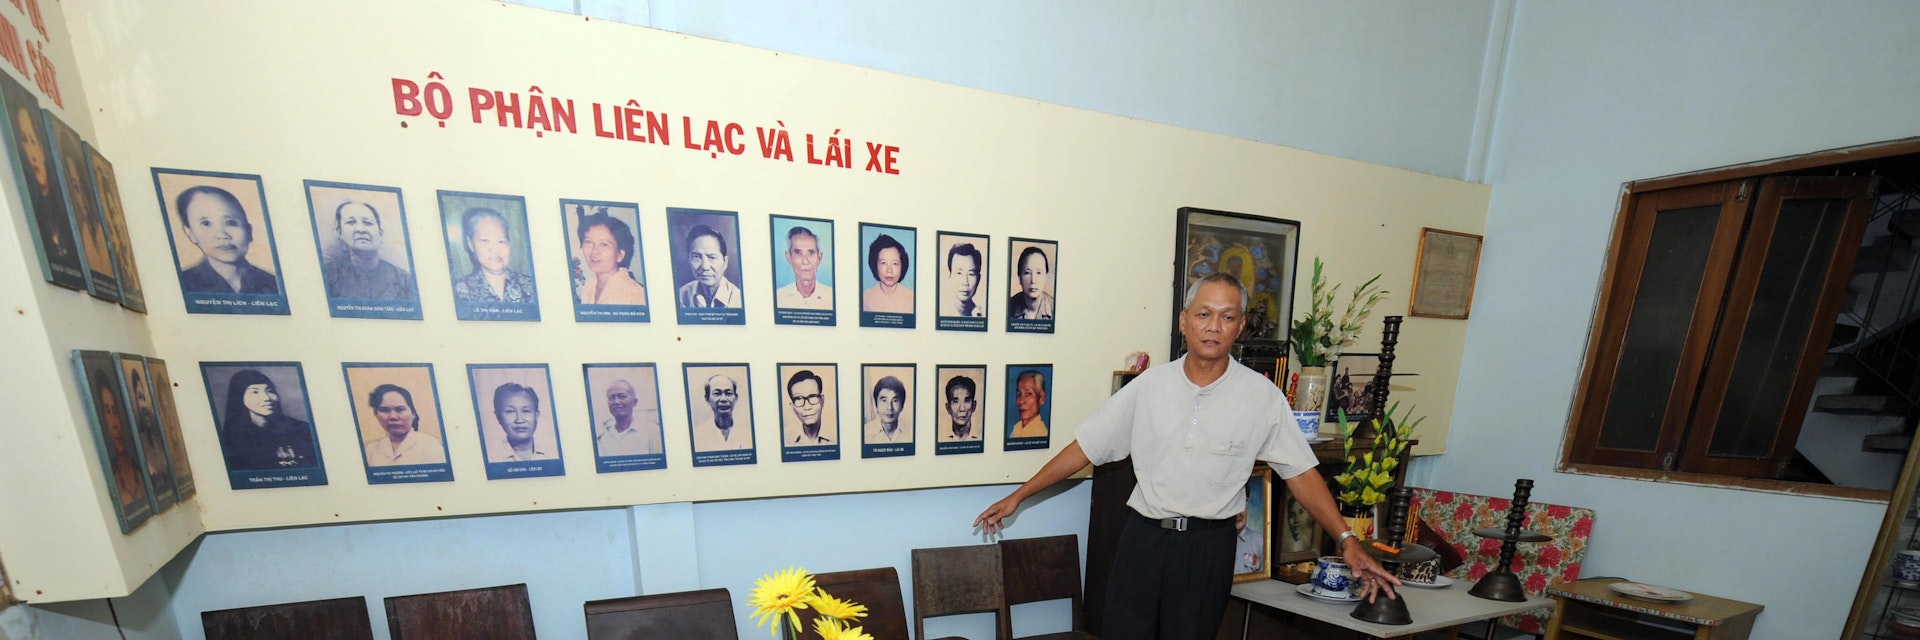 TO GO WITH: VIETNAM-MILITARY-TET-OFFENSIVE by Franck ZELLER.Ngo Van Lap, son of Pho Binh restaurant's owner Ngo Toai, a Viet Cong agent, shows in Ho Chi Minh-City, 28 January 2008, the meeting room in the restaurant where was ordered the start of the Vietnam War's Tet 1968 offensive.    AFP PHOTO/HOANG DINH Nam (Photo credit should read HOANG DINH NAM/AFP/Getty Images)